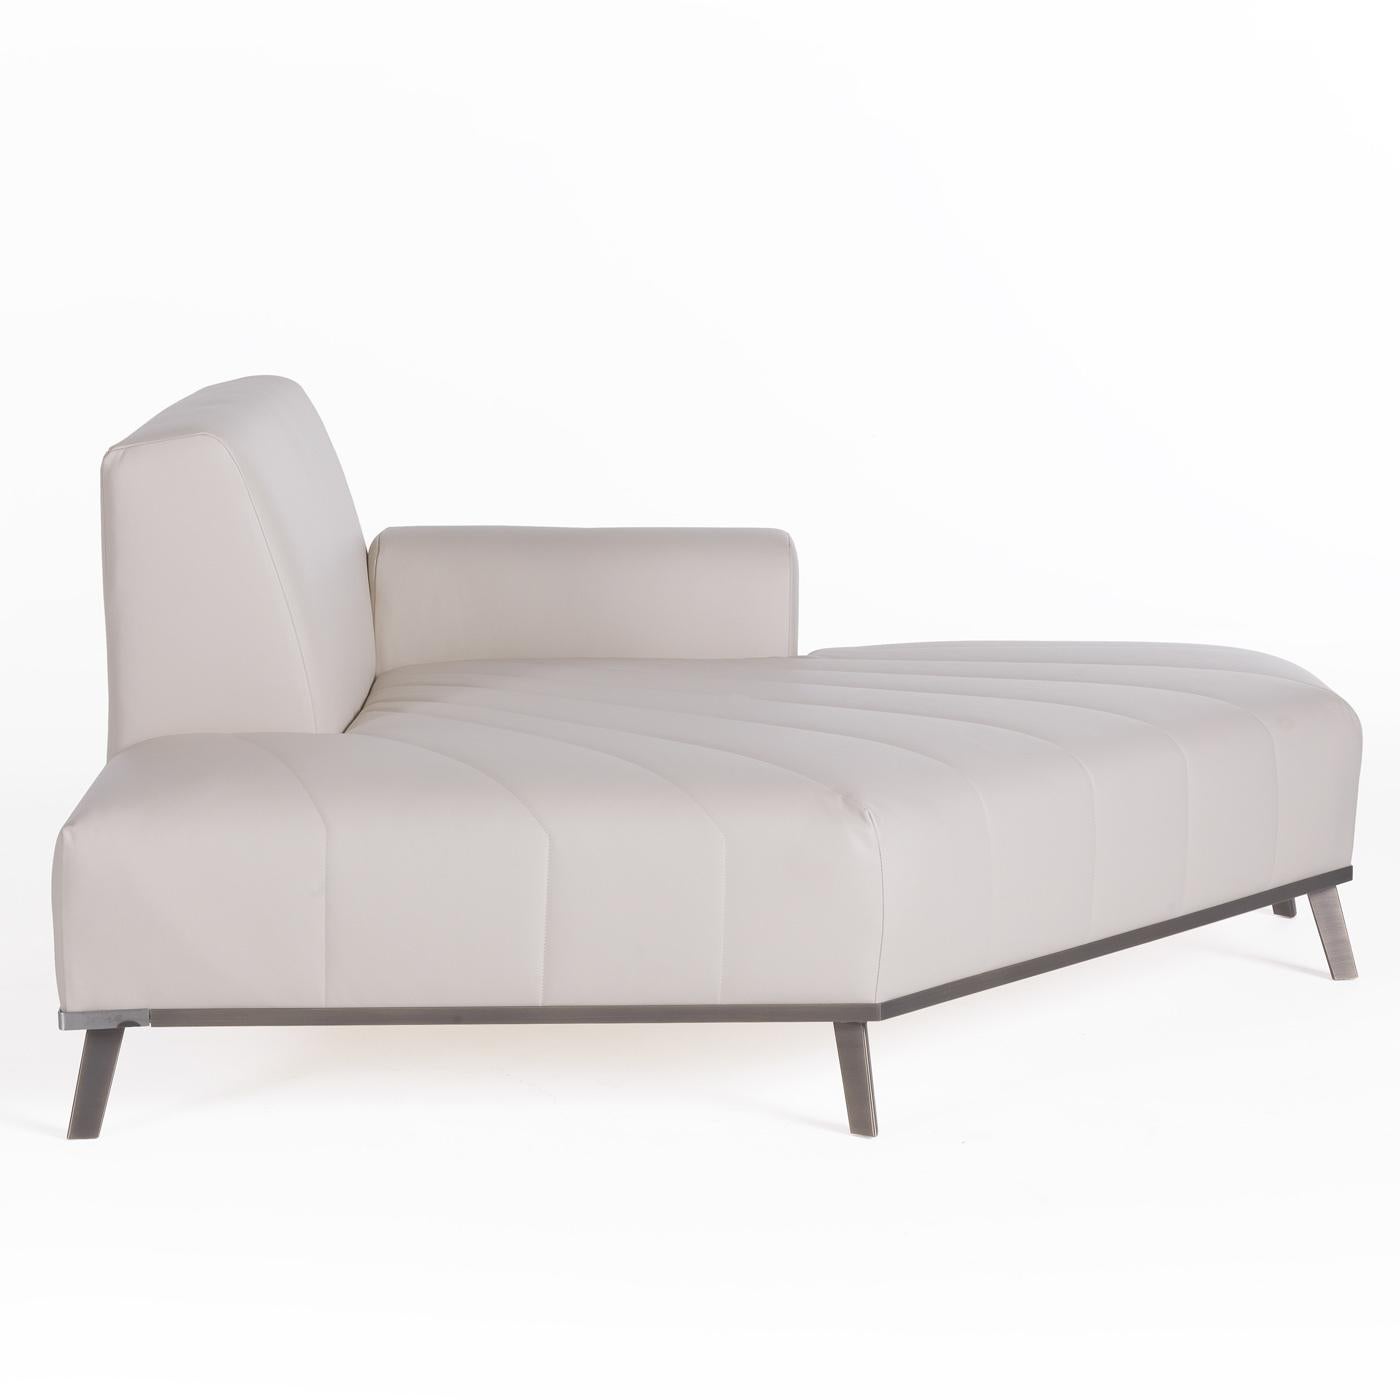 An example of simple and sophisticated design, this chaise longue is a modular piece to be placed on the left corner of a living room arrangement. Comfortable and capacious, the piece is covered in white leather that contrasts elegantly with the